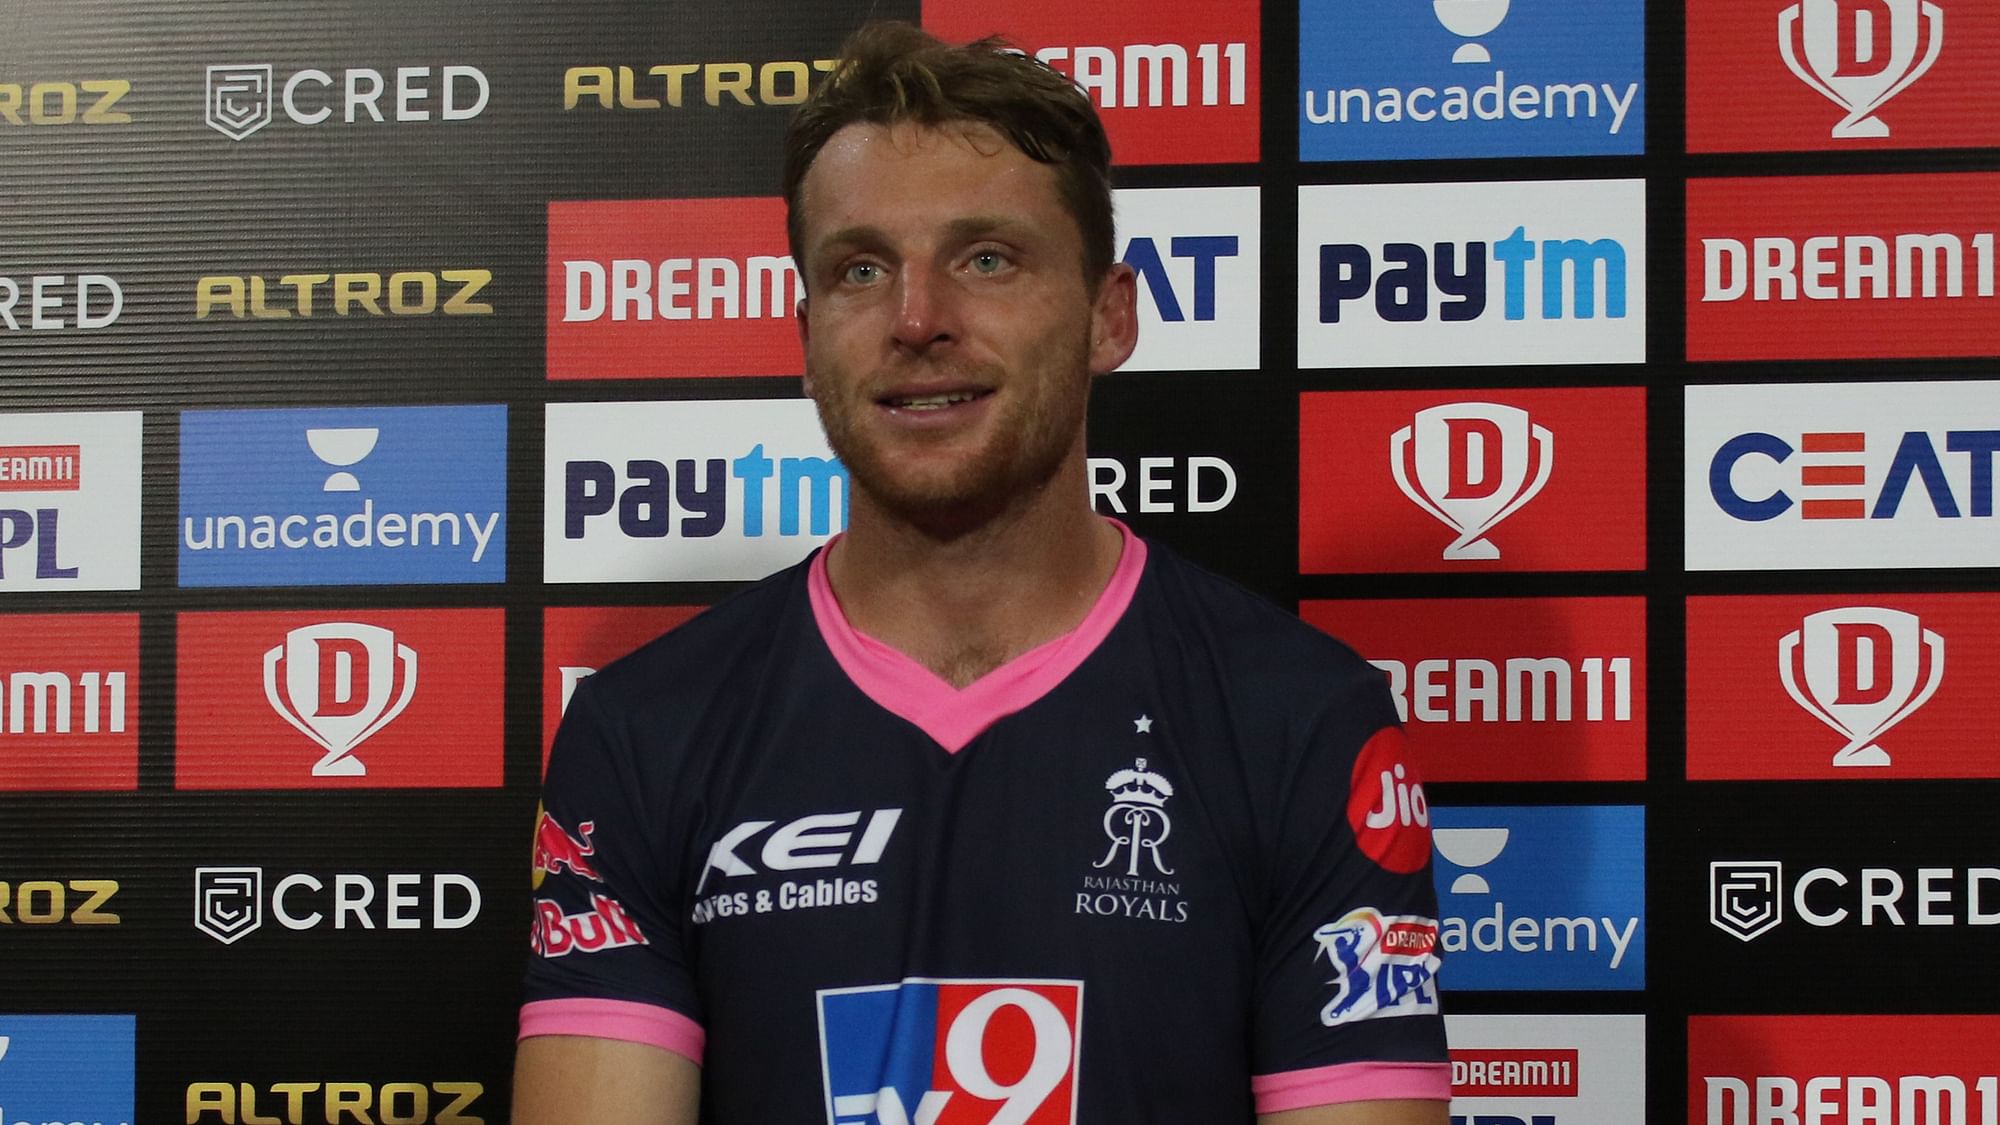 Rajasthan Royals’ opener Jos Buttler scored 70 runs in 44 balls to give his side a glimmer of hope